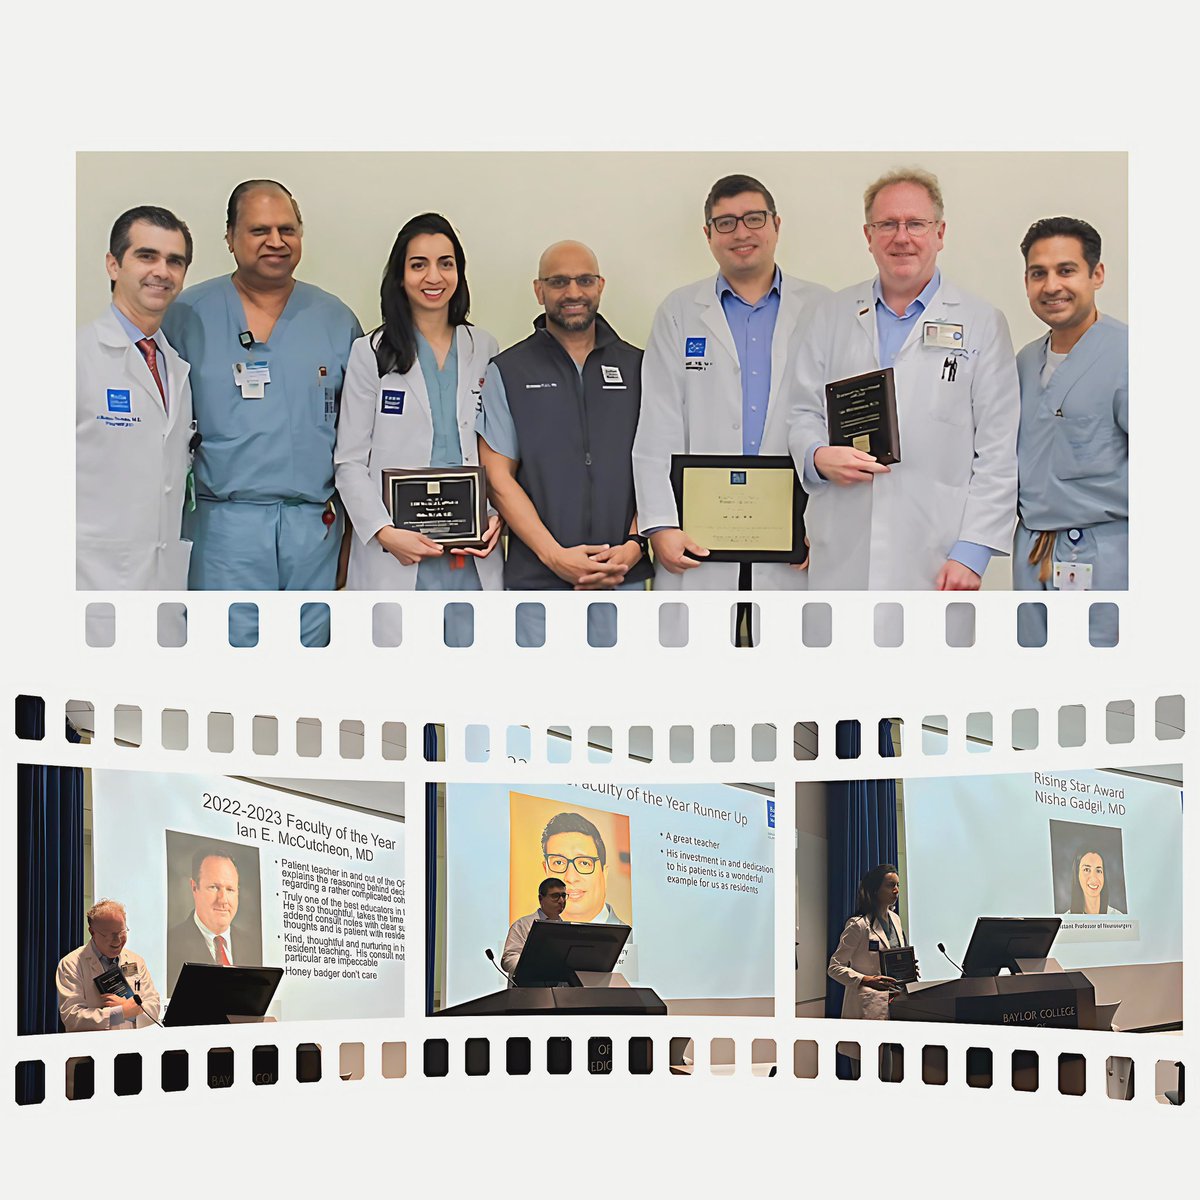 Teaching is an art. Our residency program thrives because of the great teachers we have. Good seeing mentors, colleagues and friends recognized this morning. @AliJalaliMDPhD @NishaGadgilMD @BCMNeurosurgery @DoctorGRao